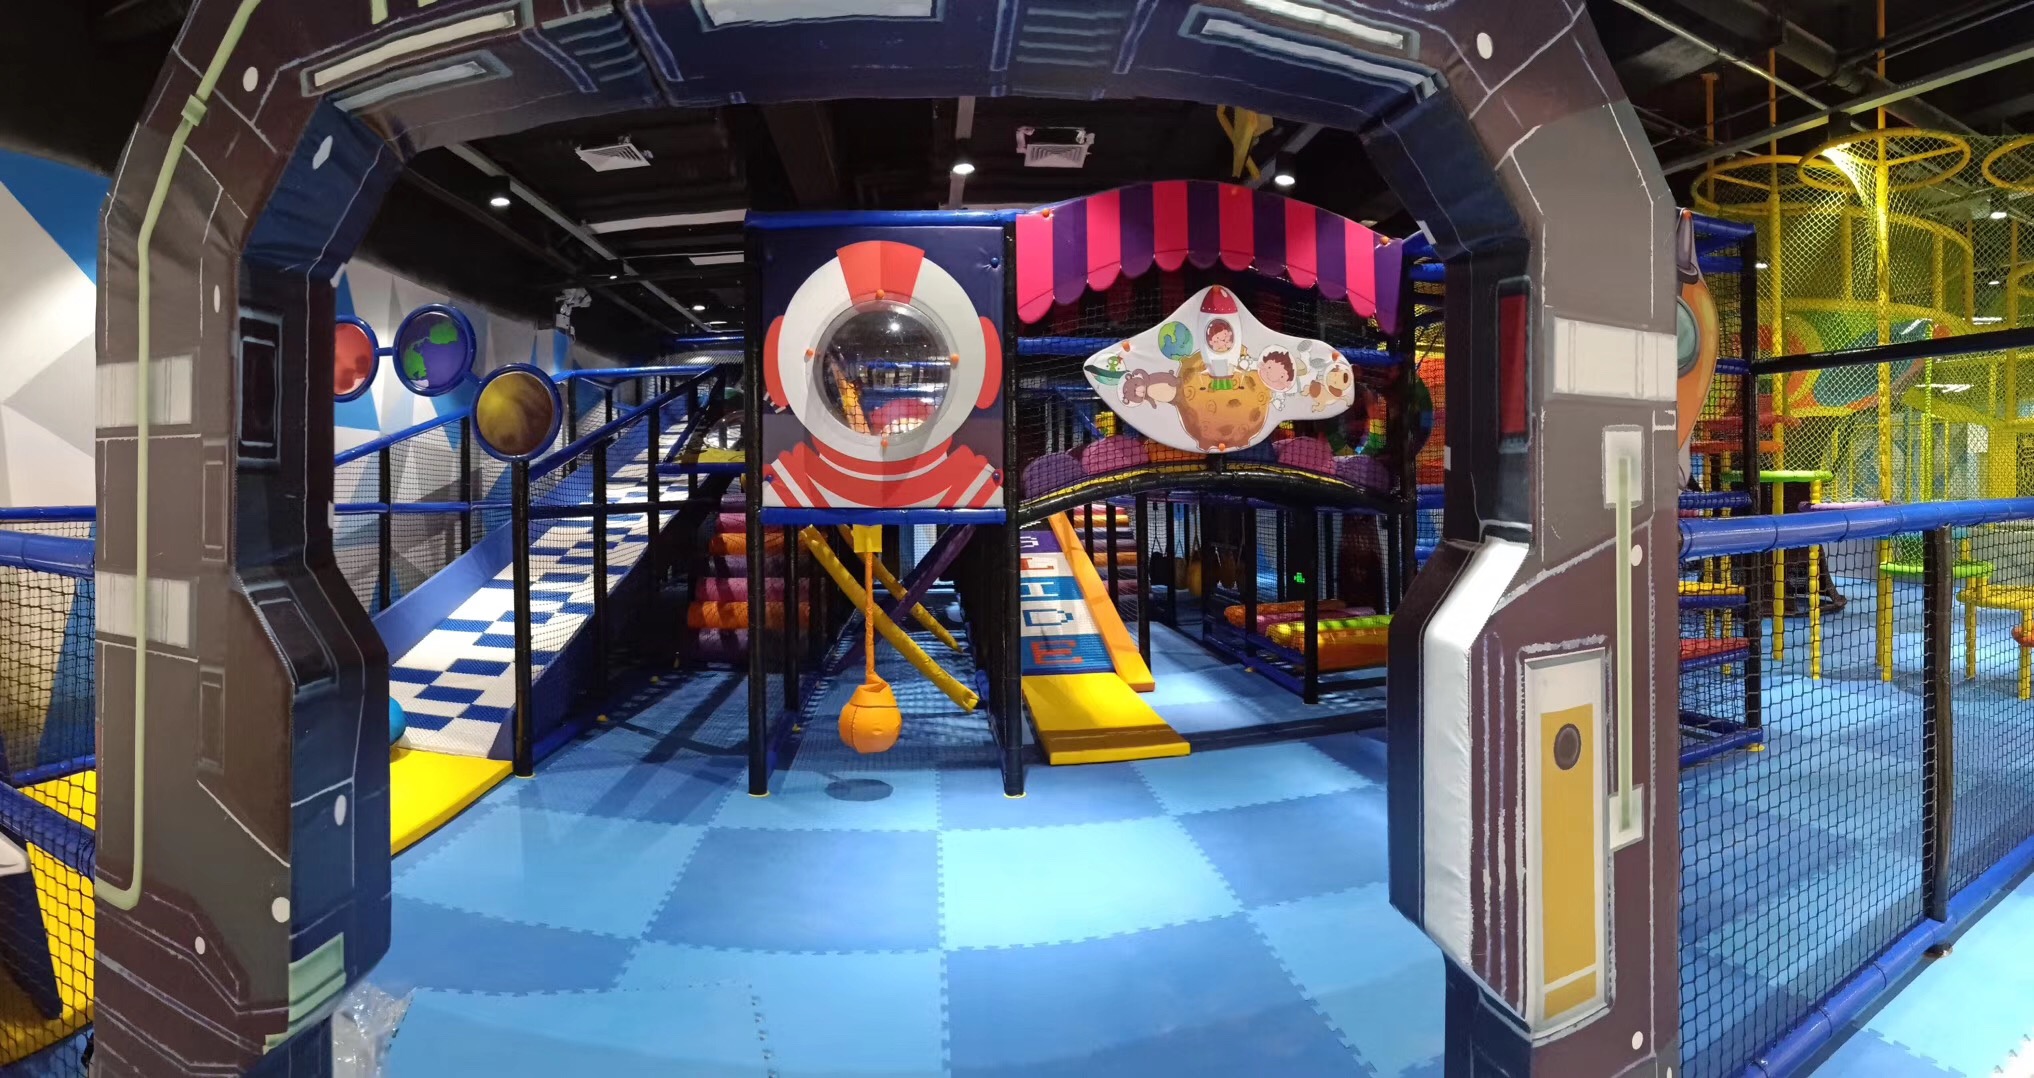 What Are the Requirements for Children Indoor Playground Equipment？